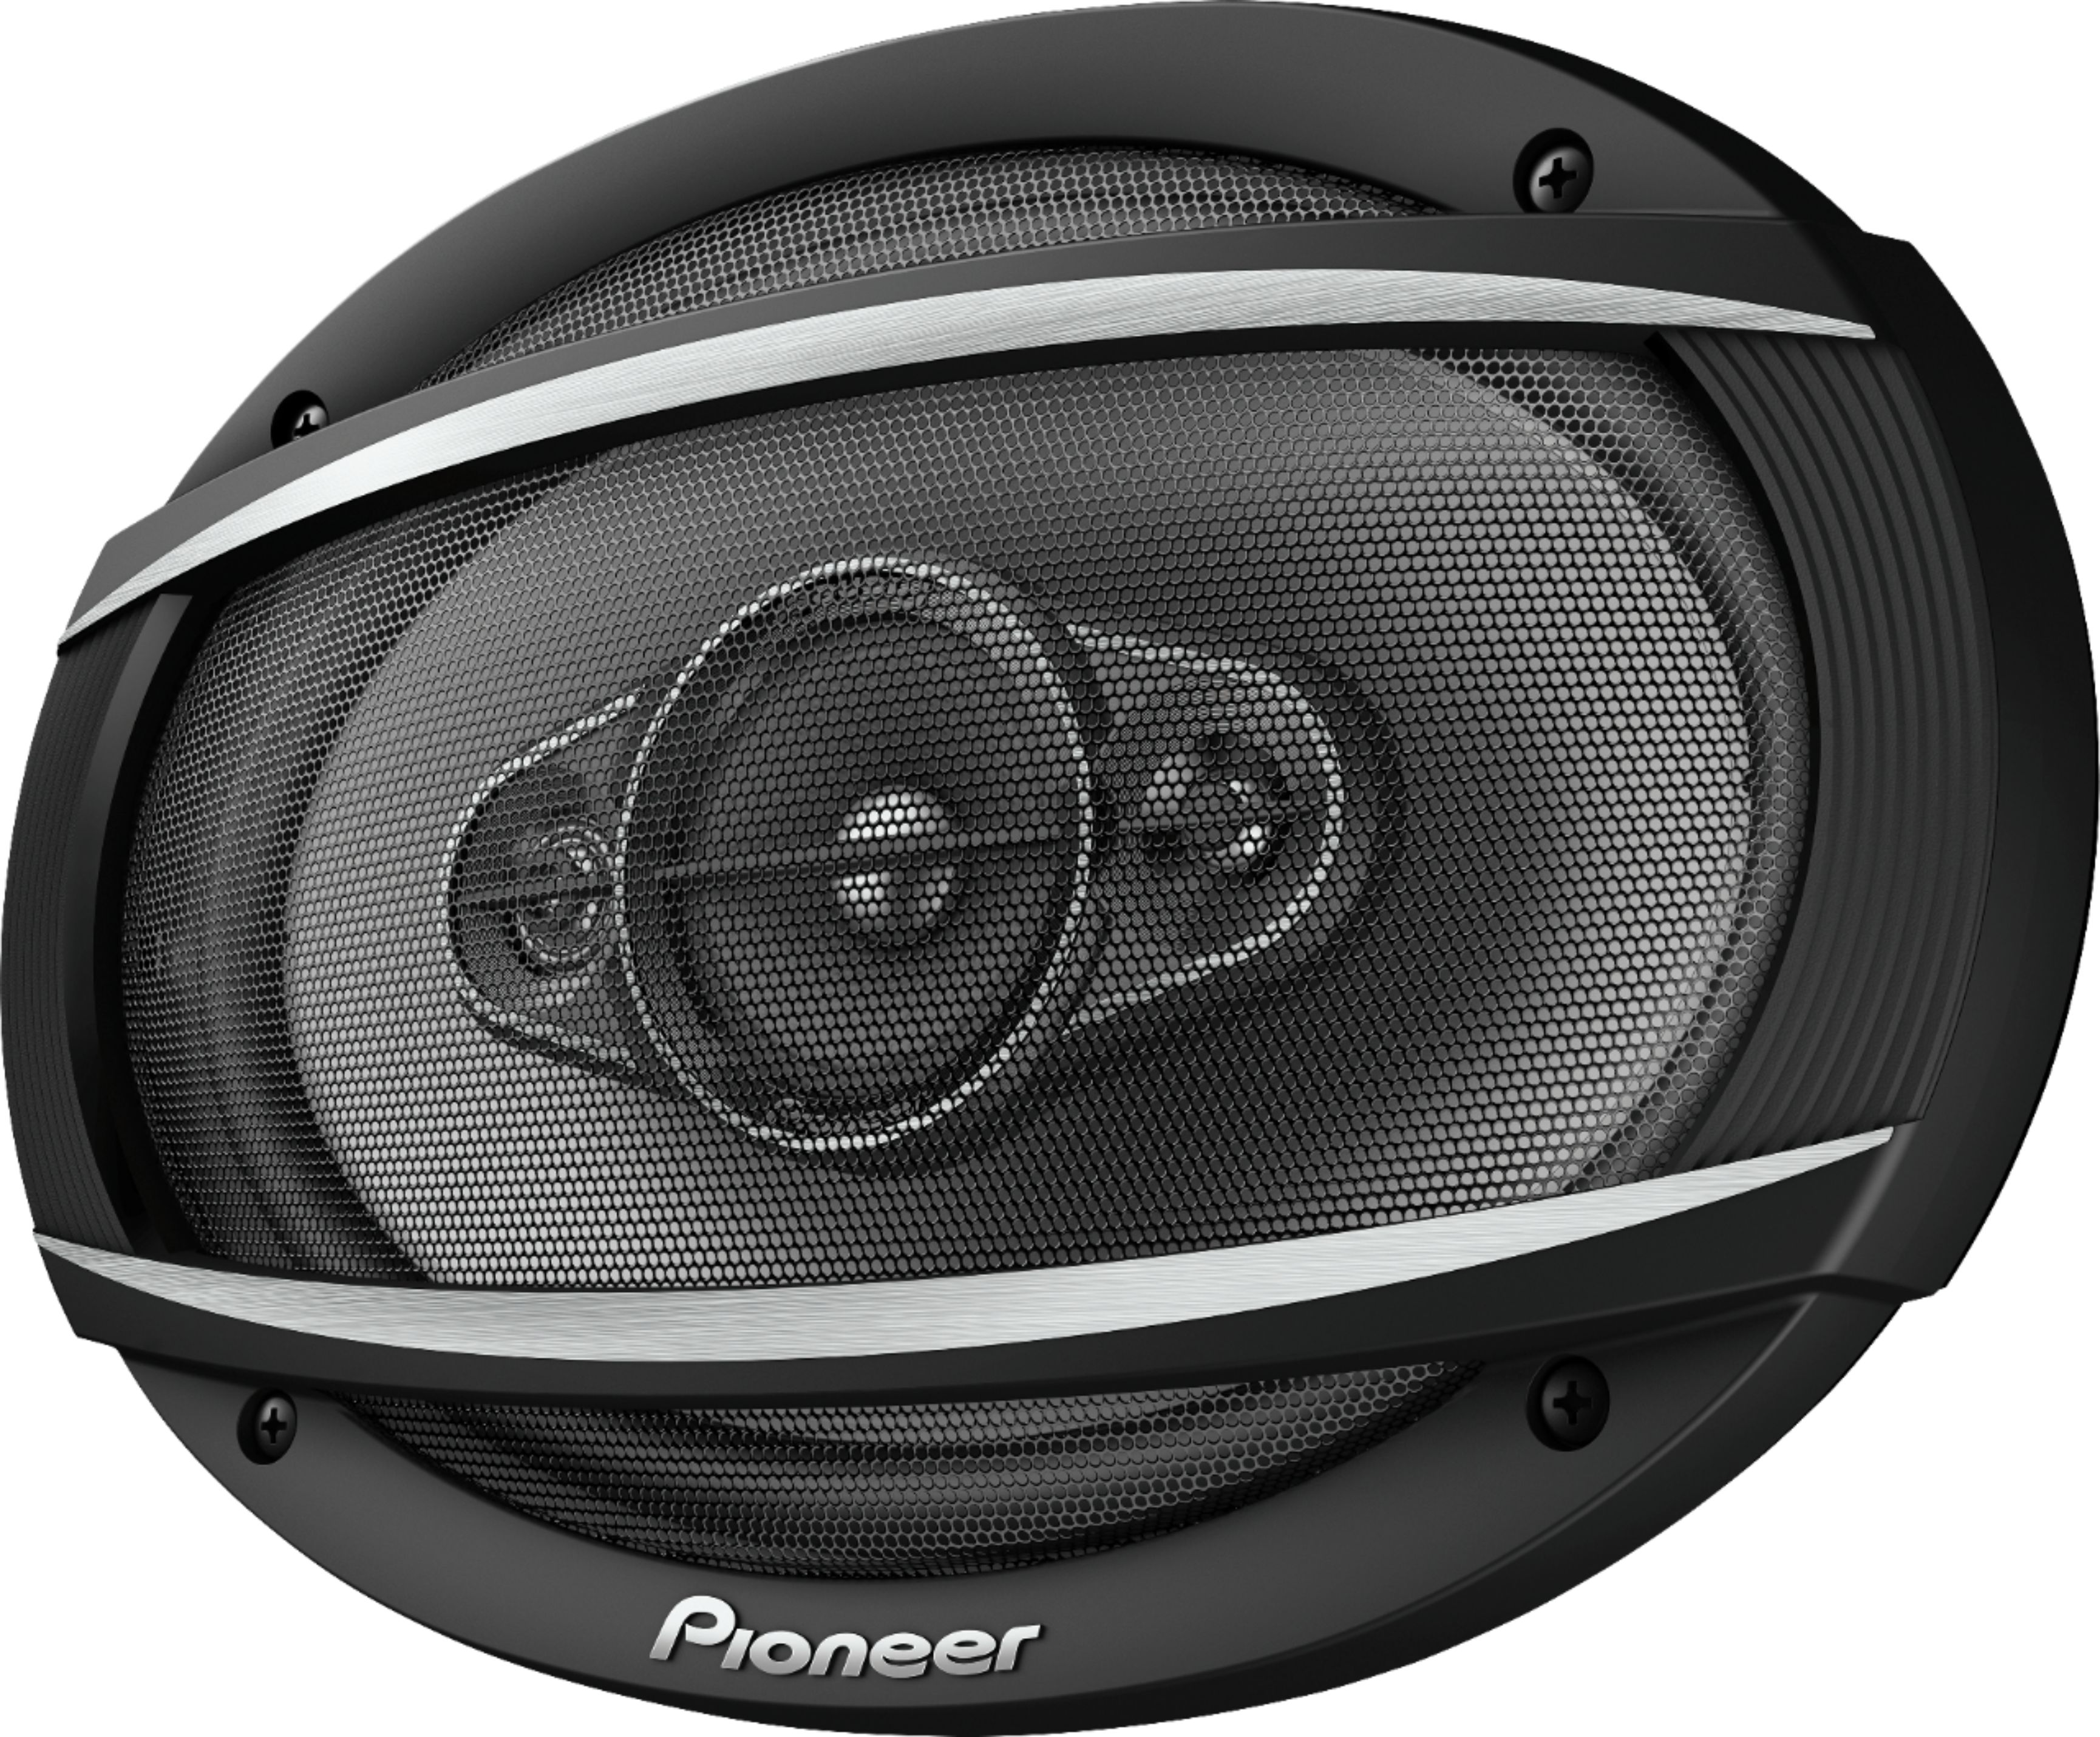 Angle View: Pioneer - 6" x 8" - 4-way, 350 W Max Power, IMPP™ cone, 11mm Tweeter and 11mm Super Tweeter and 1-5/8" Midrange - Coaxial (pair) - Black